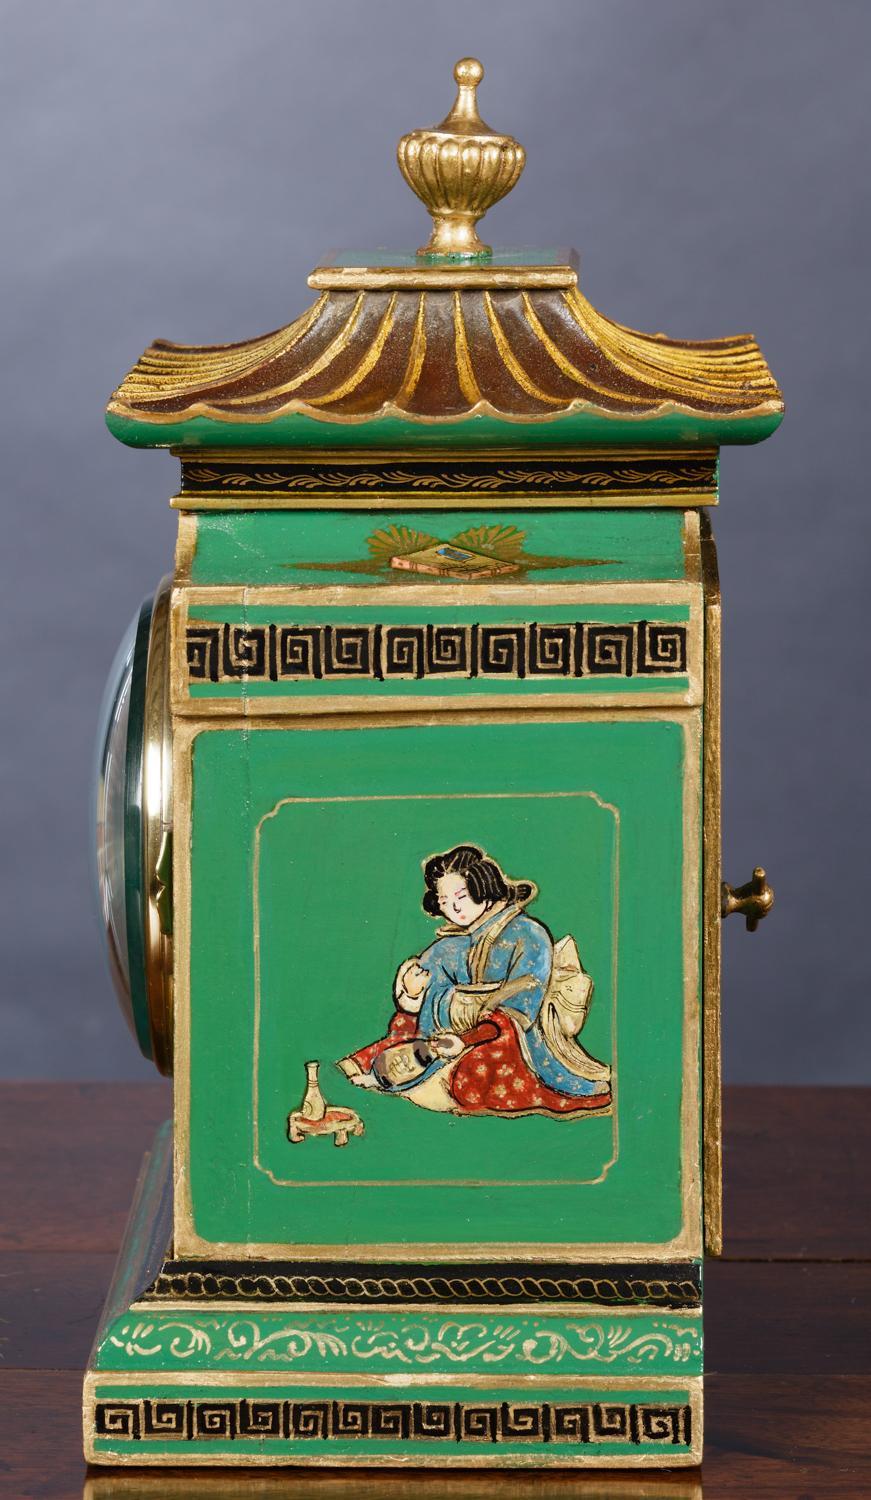 Mappin and Webb

Edwardian mantel clock housed in a chinoiserie decorated case on a green ground with typical Chinese scenes standing on a raised, stepped base and surmounted by a pagoda top with vase finial.

Eight day movement with lever